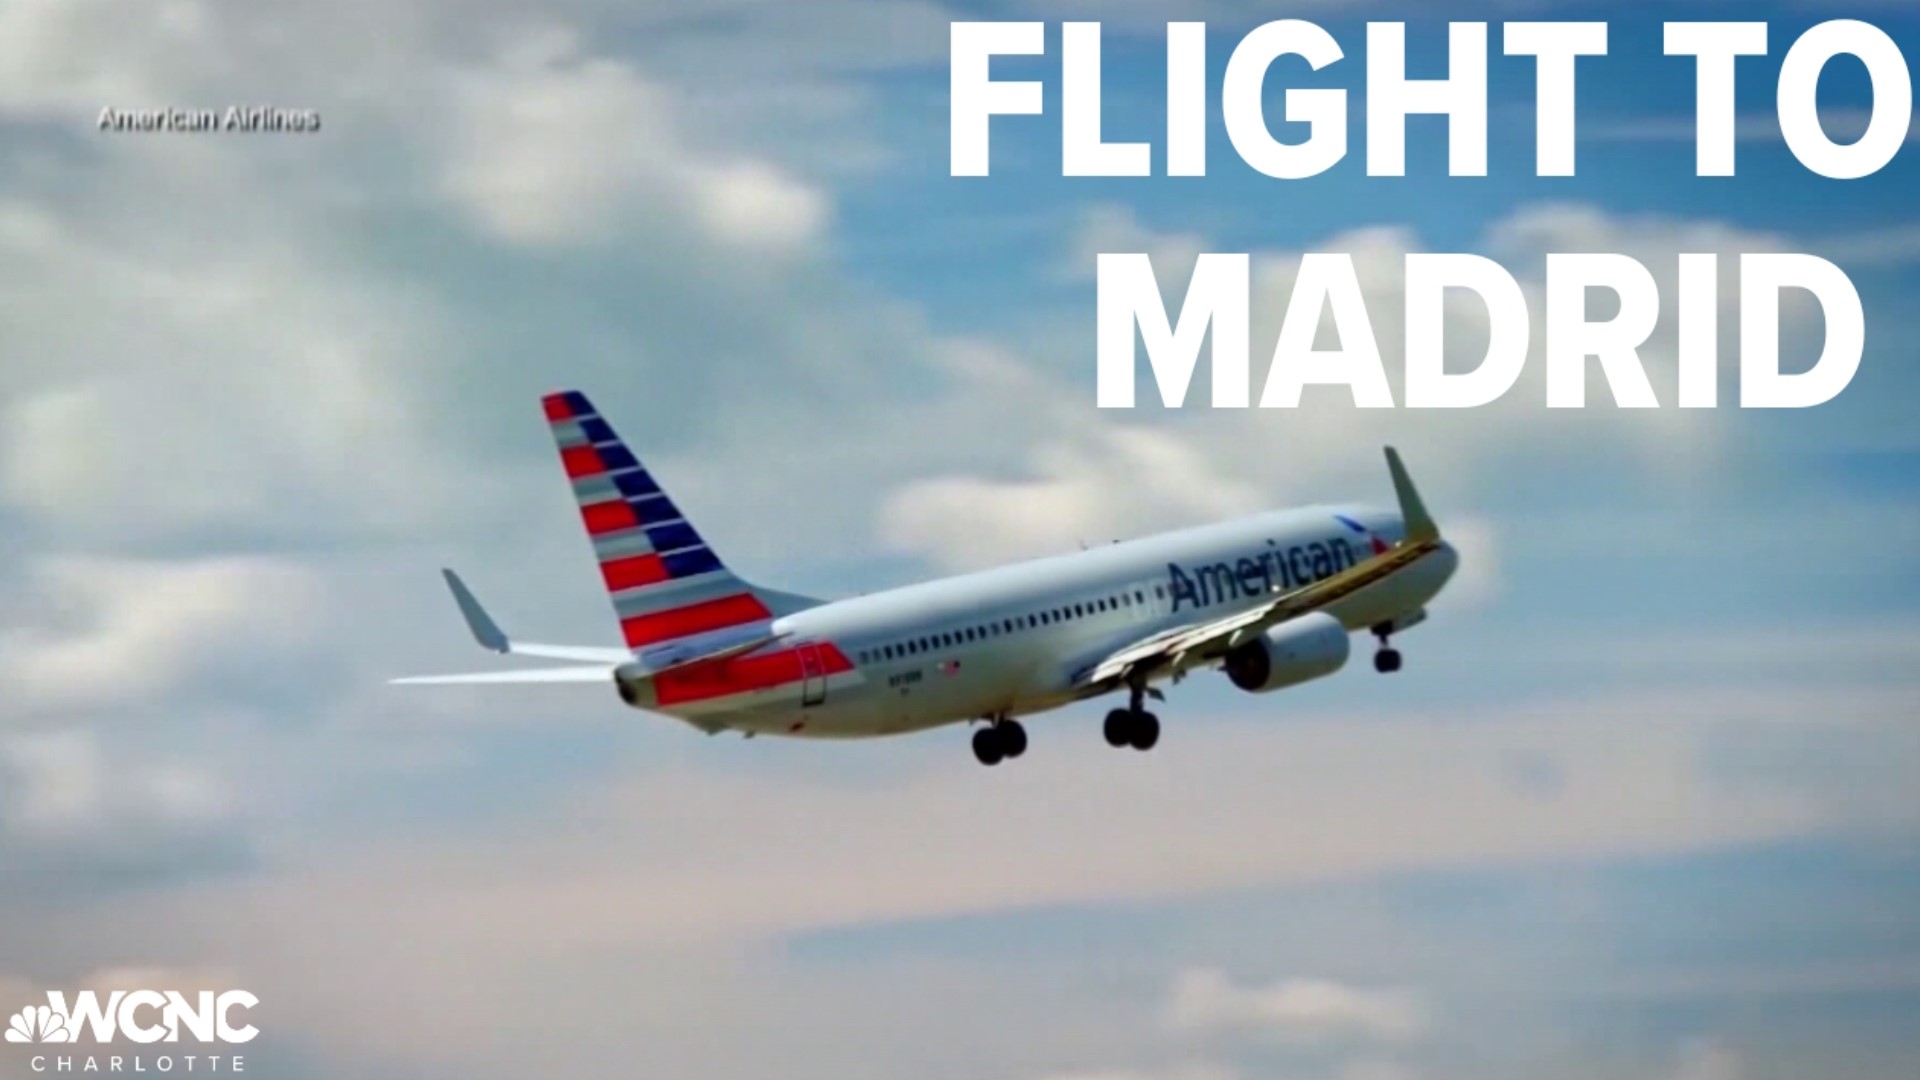 American Airlines is expanding service from Charlotte Douglas to Madrid from seasonal to year-round.